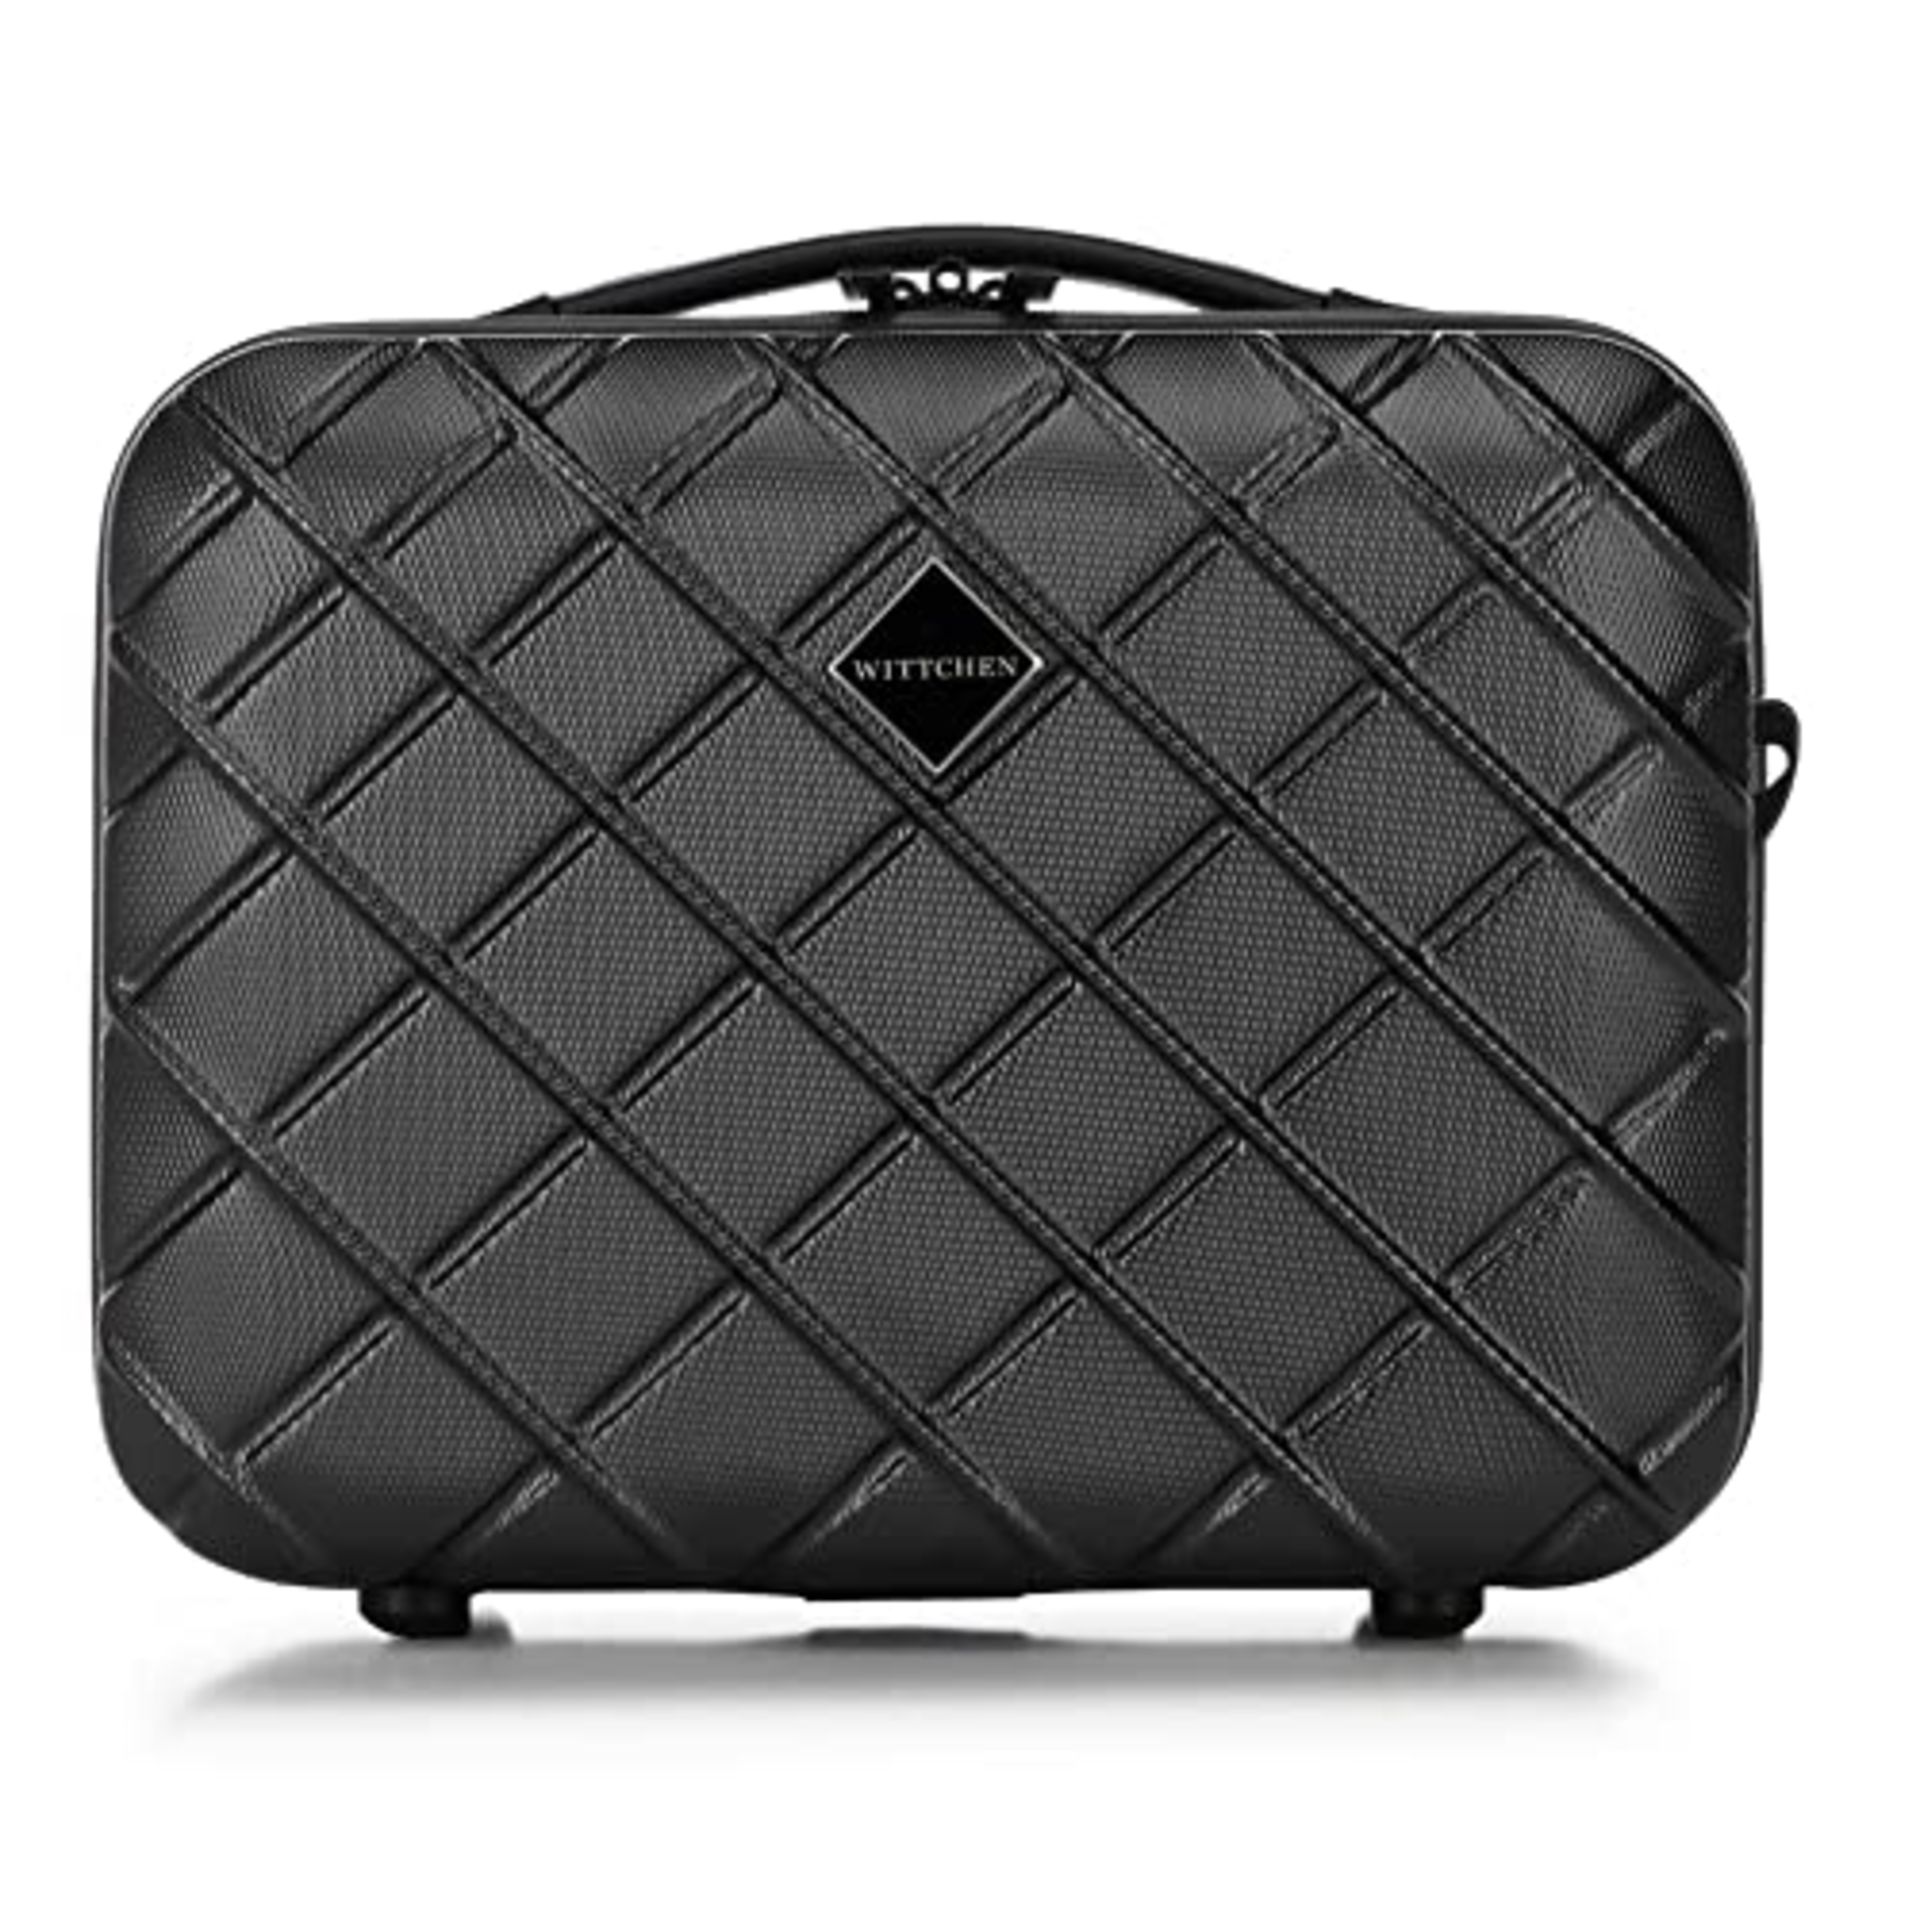 WITTCHEN cosmetic case travel suitcase carry-on cabin luggage hardshell made of ABS wi